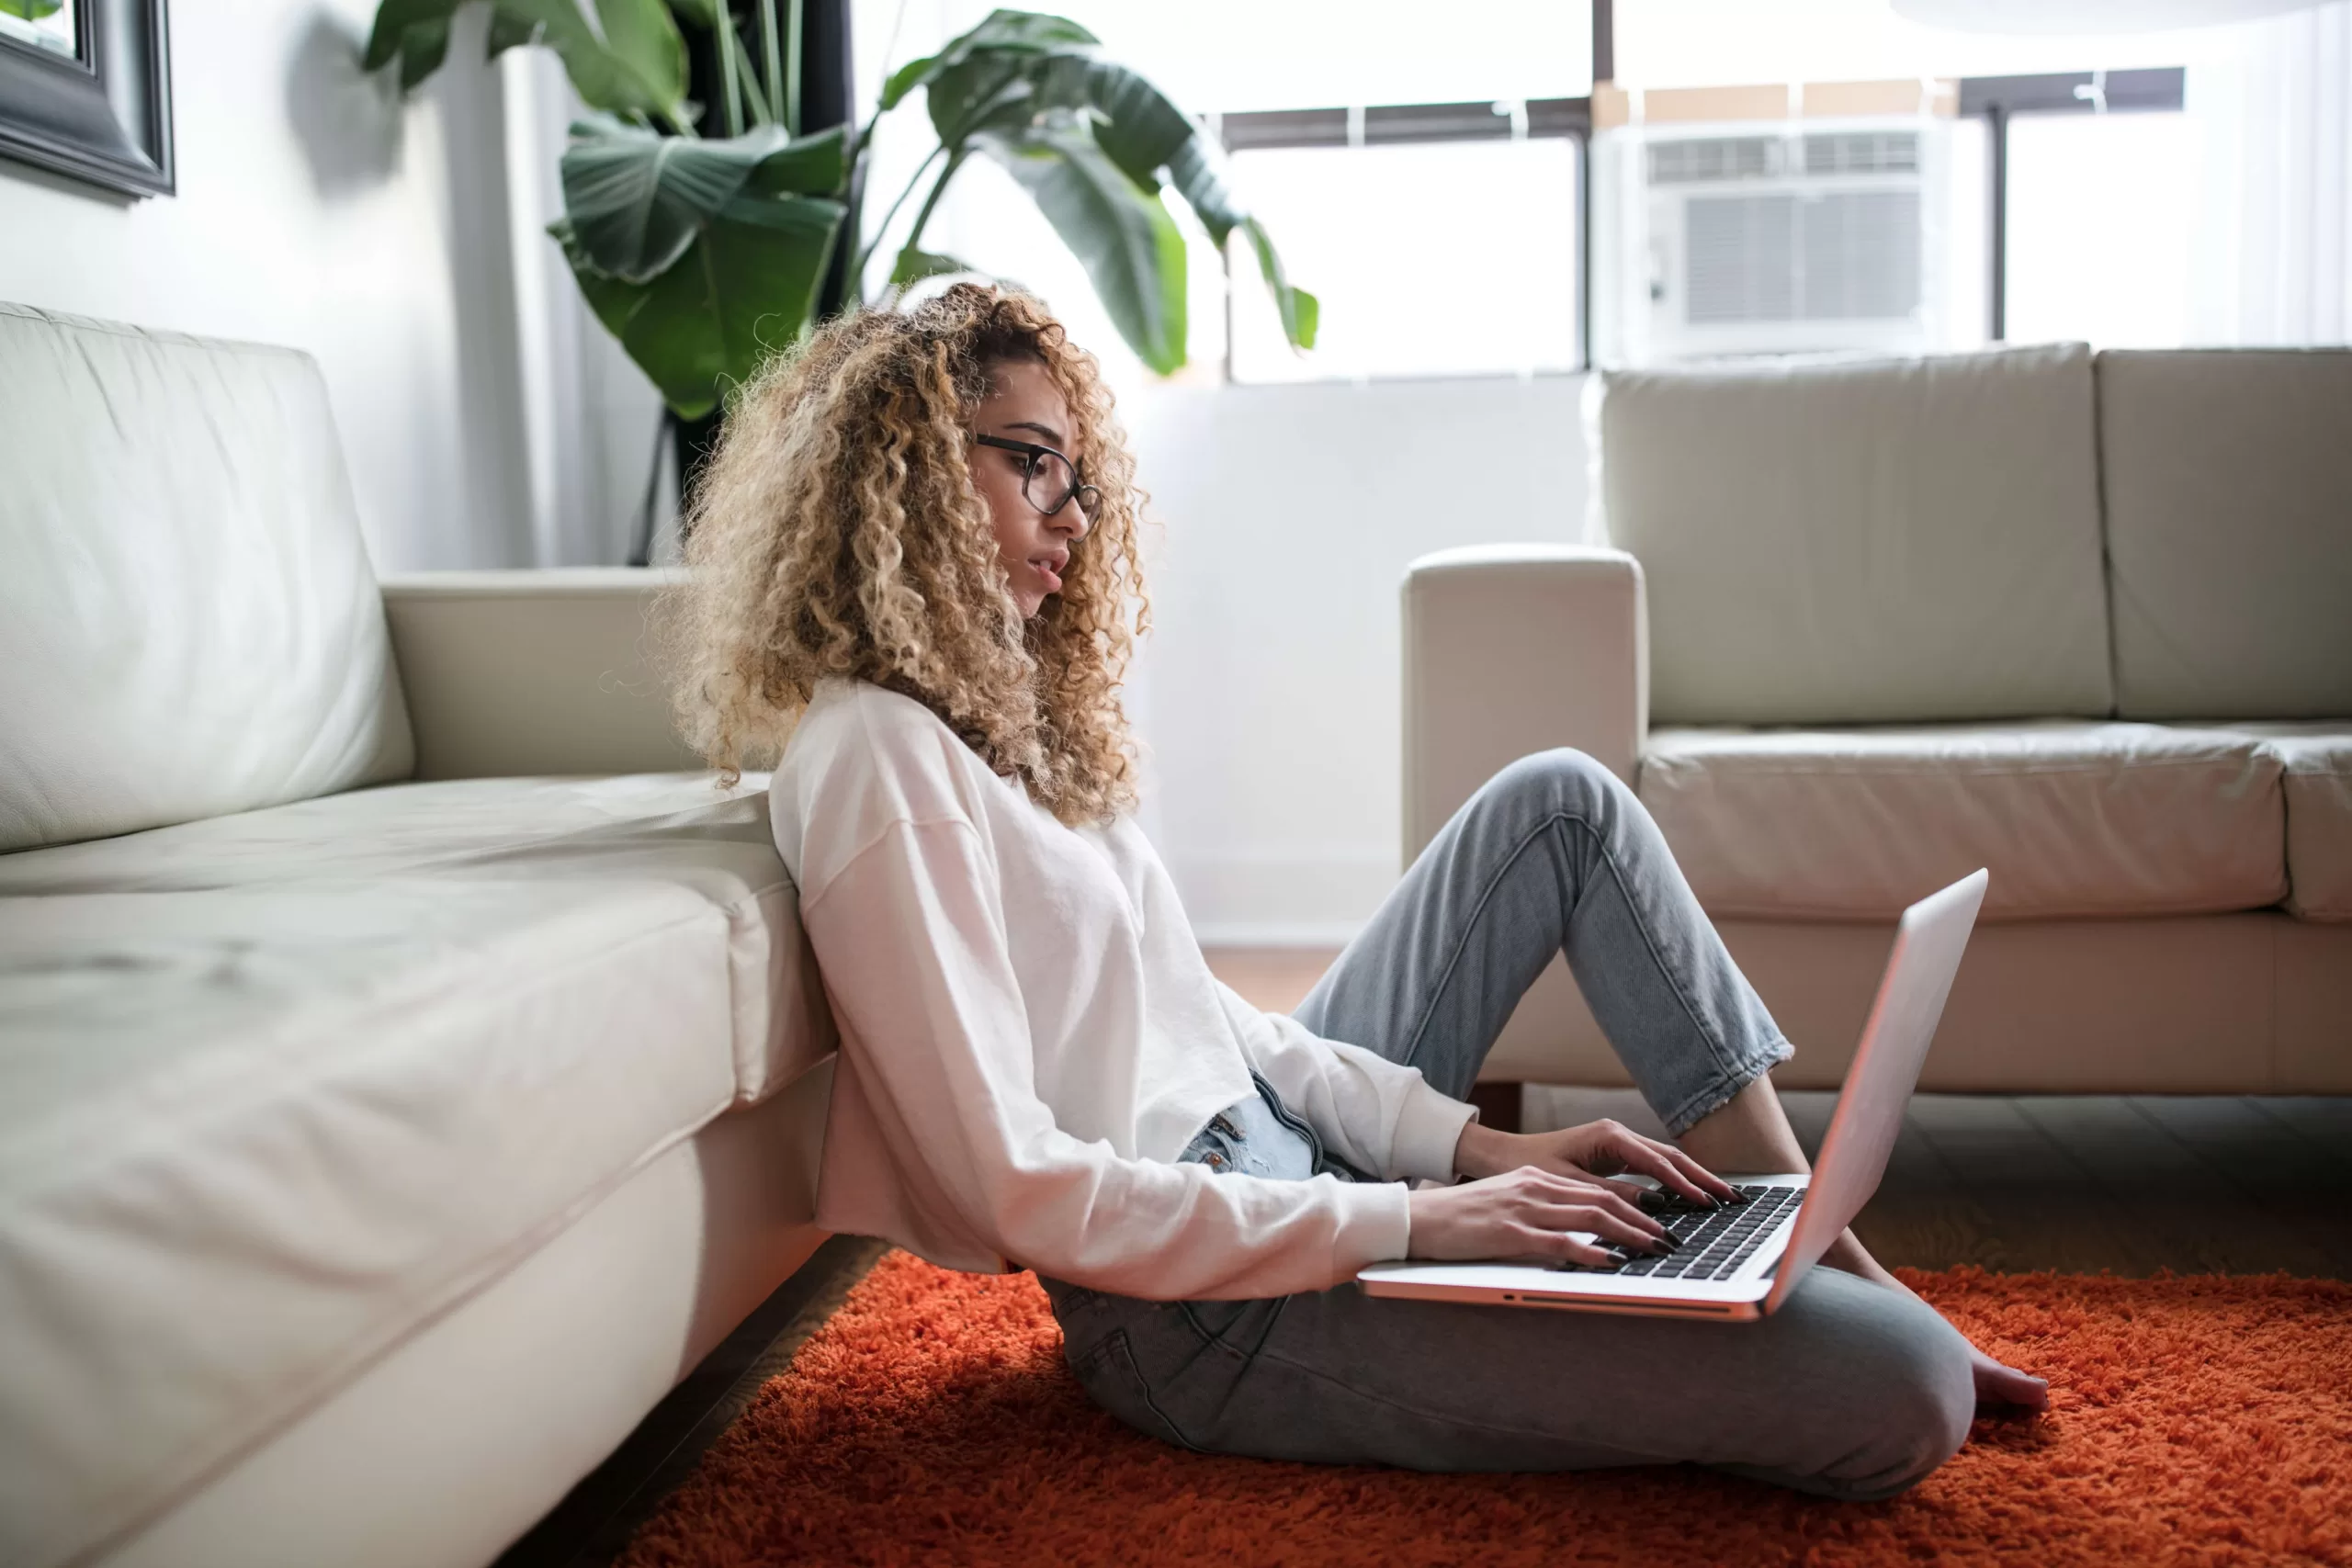 A curly hair woman sitting down searching online on a laptop -cash your opinions